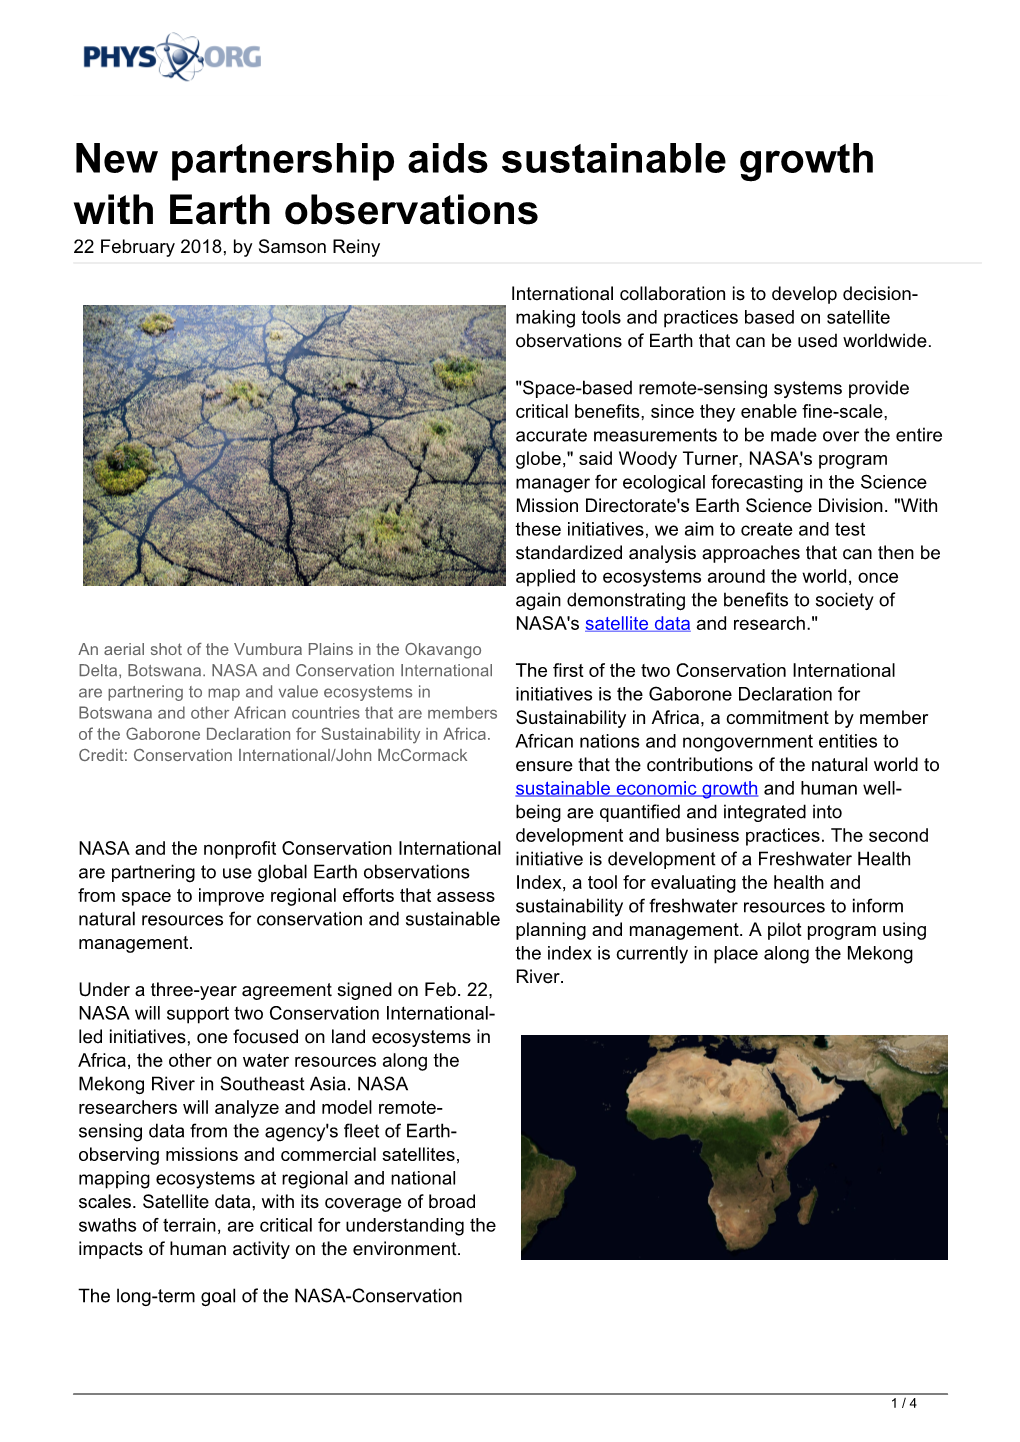 New Partnership Aids Sustainable Growth with Earth Observations 22 February 2018, by Samson Reiny